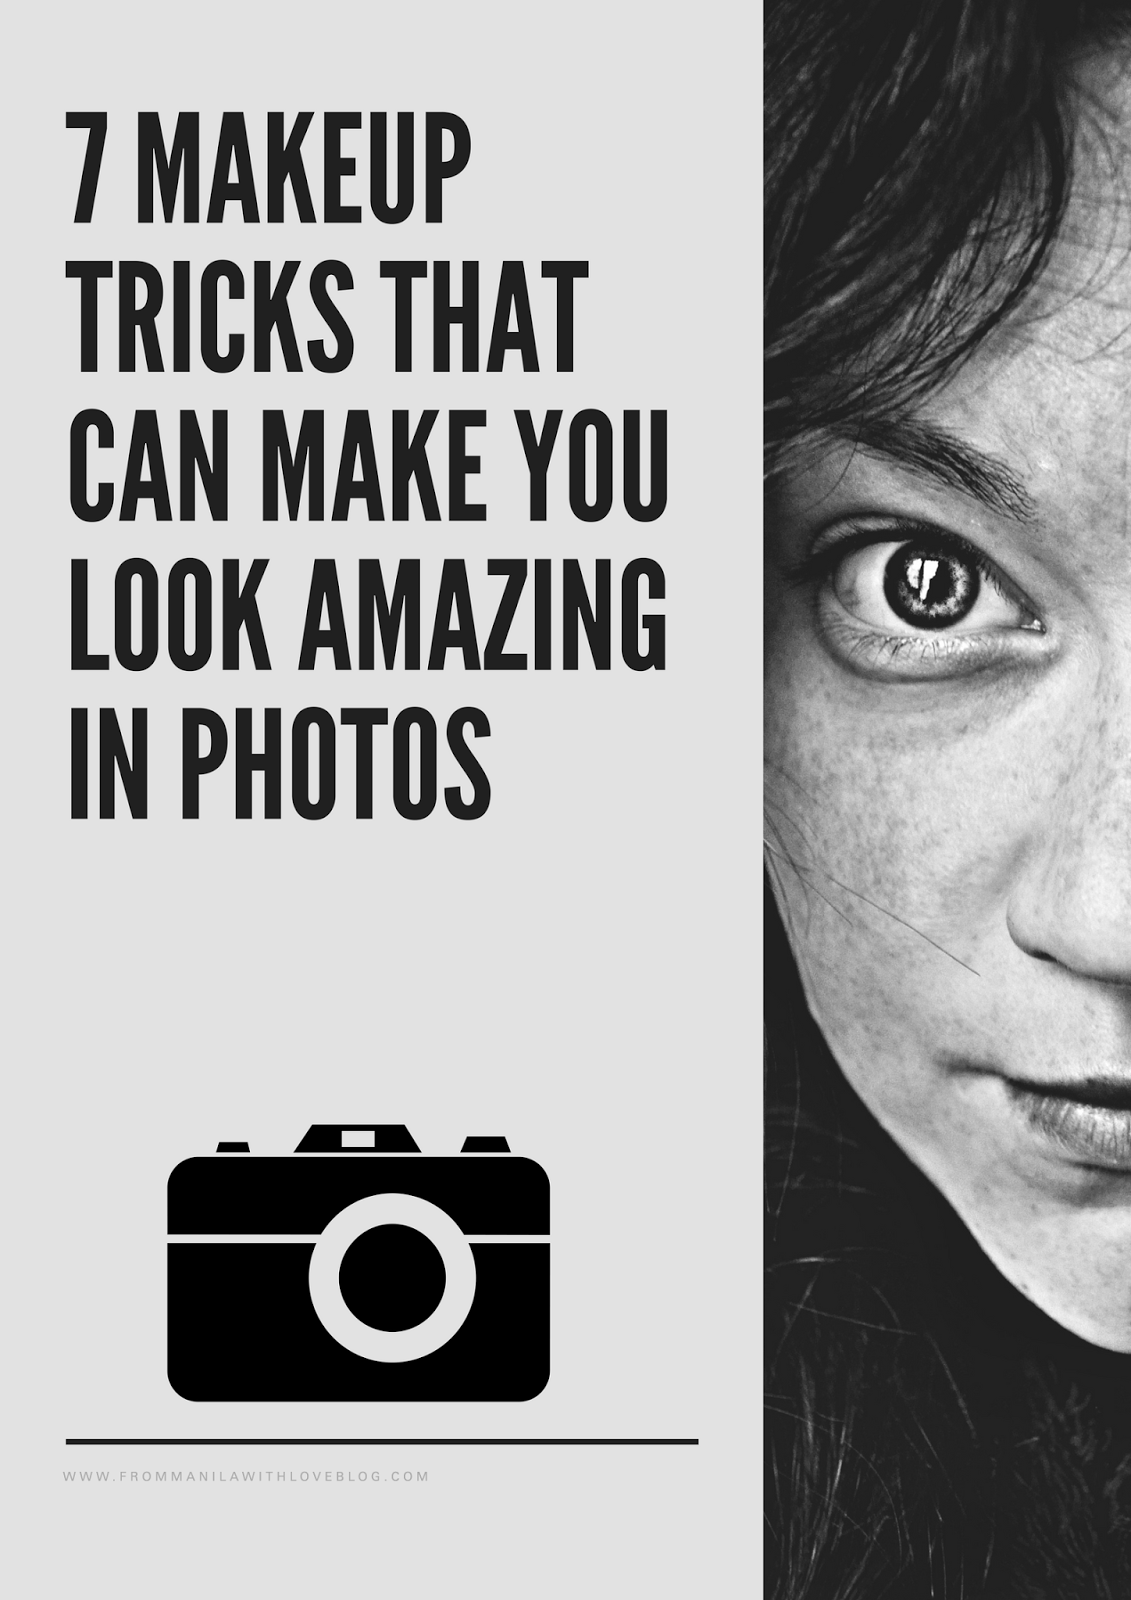 7 makeup tricks to make you look amazing in photos